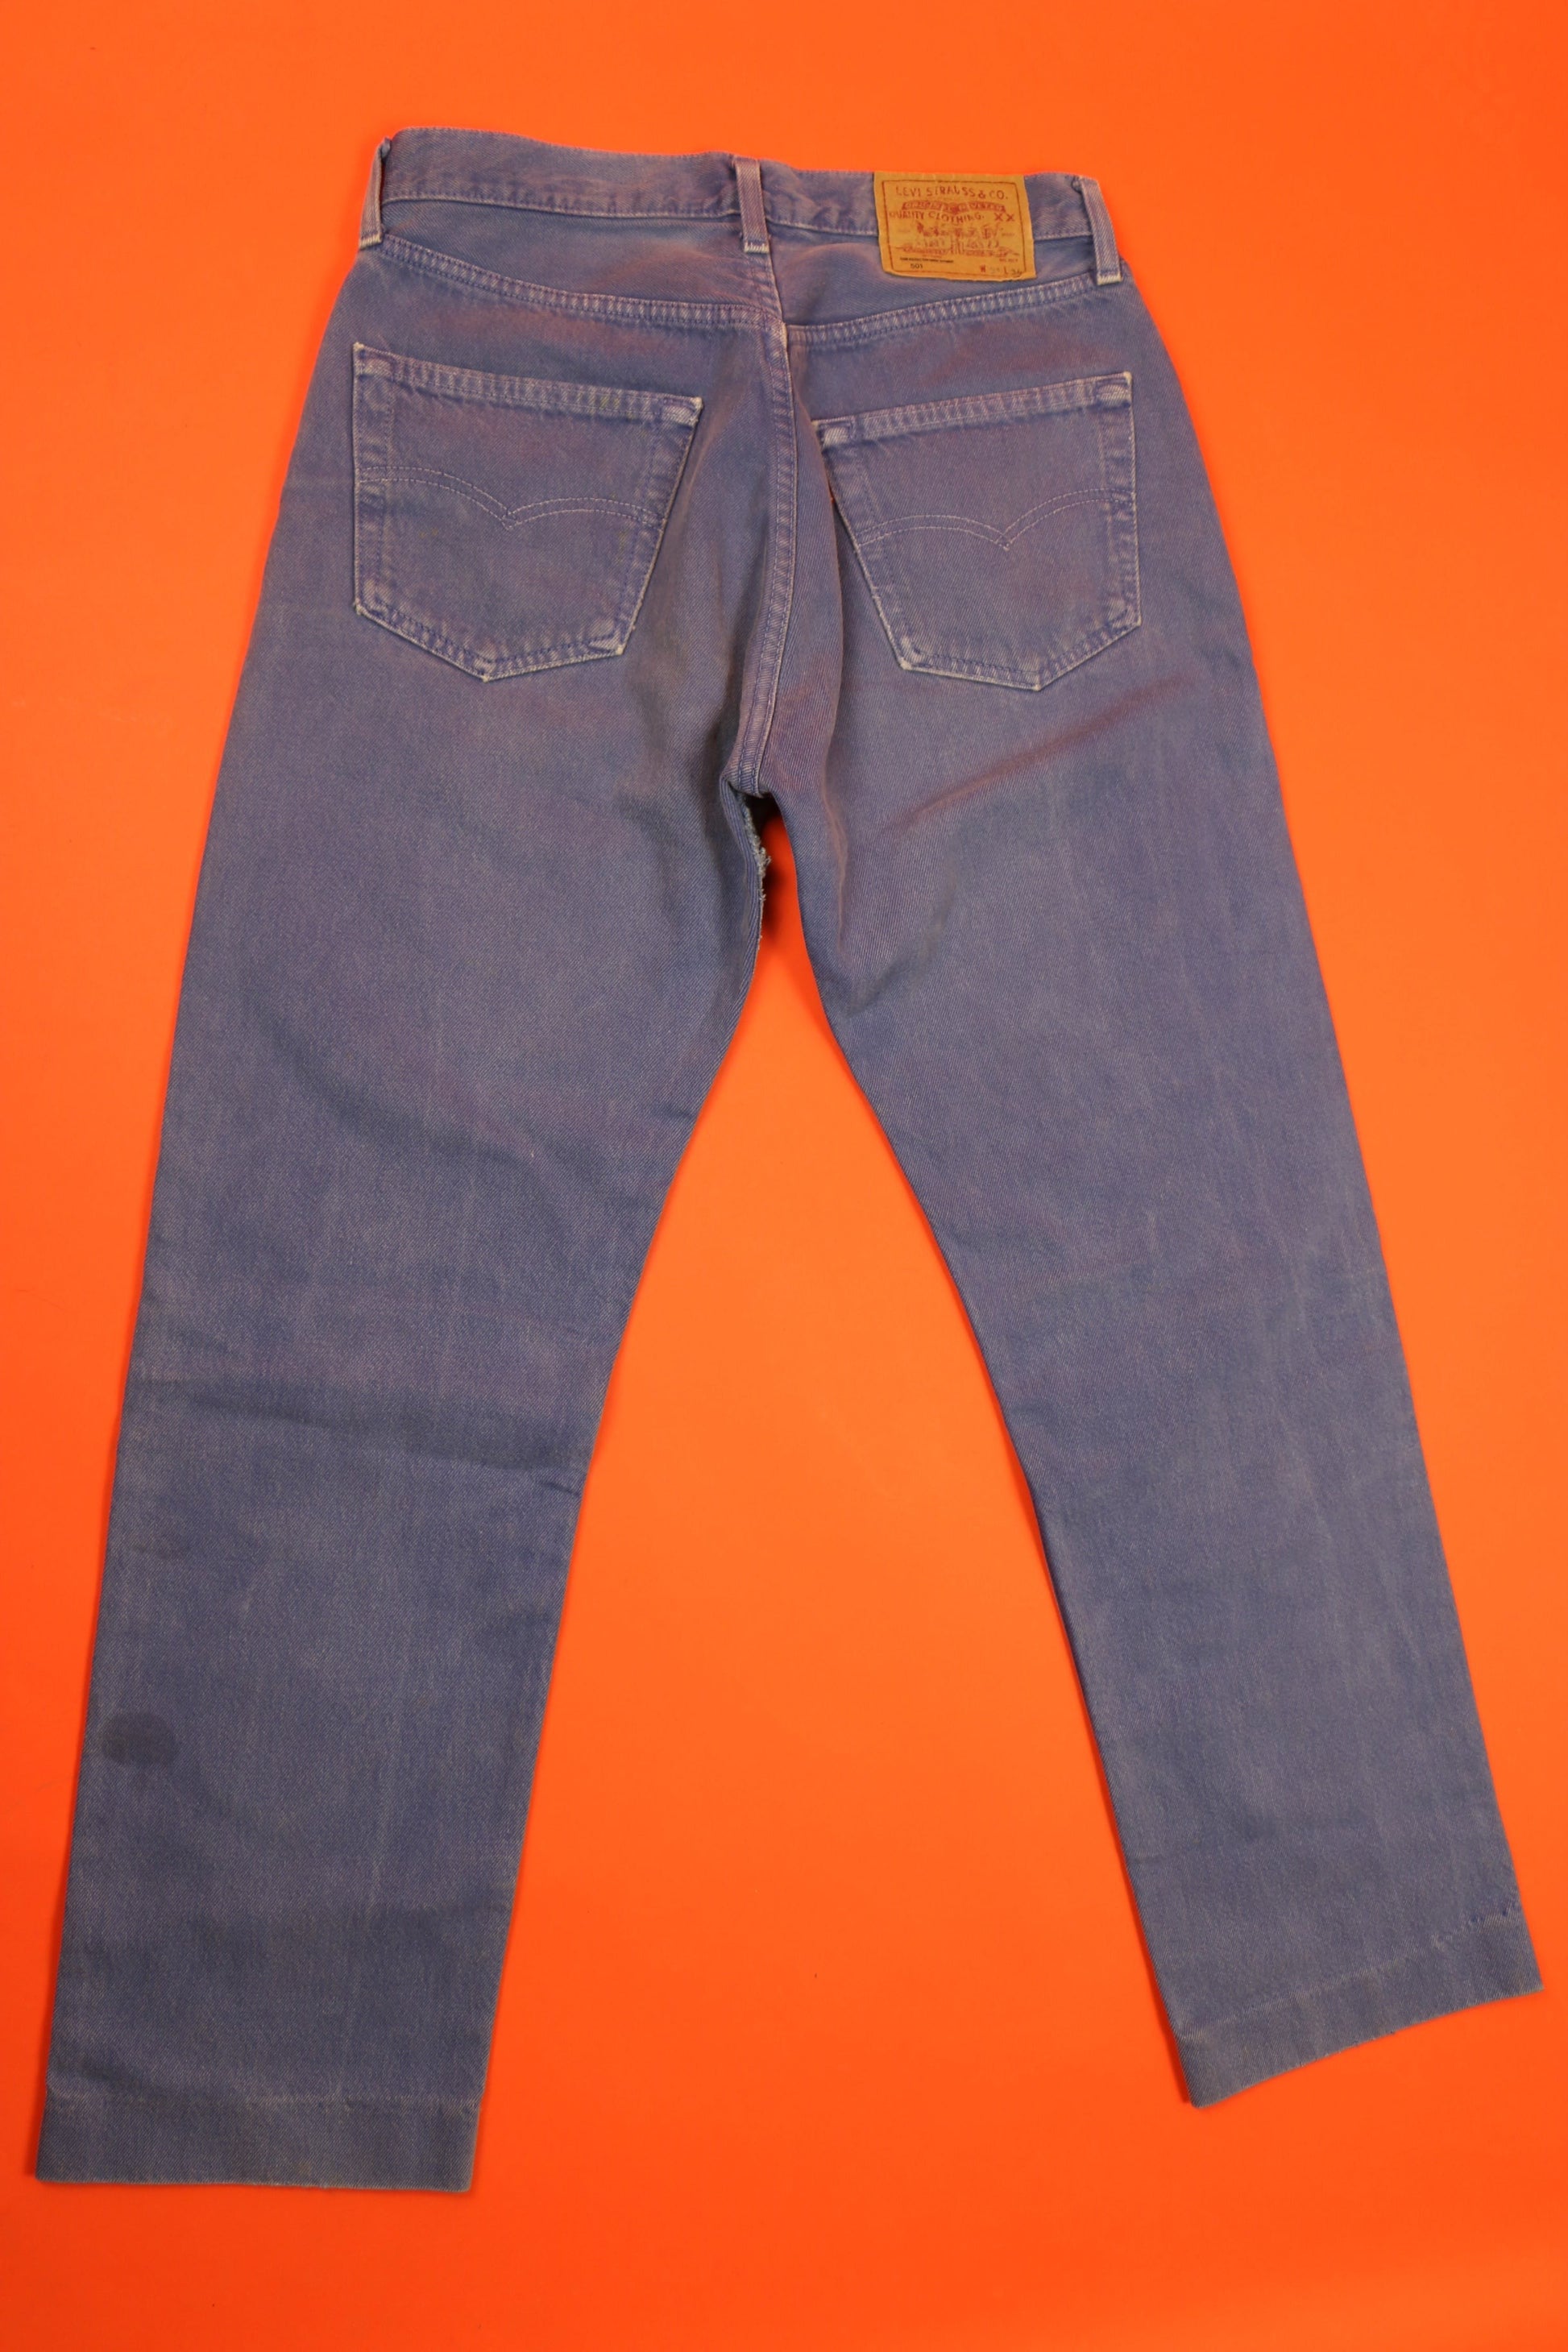 Levi's 501 Jeans Made in U.S.A. 'W31 L34' - vintage clothing clochard92.com